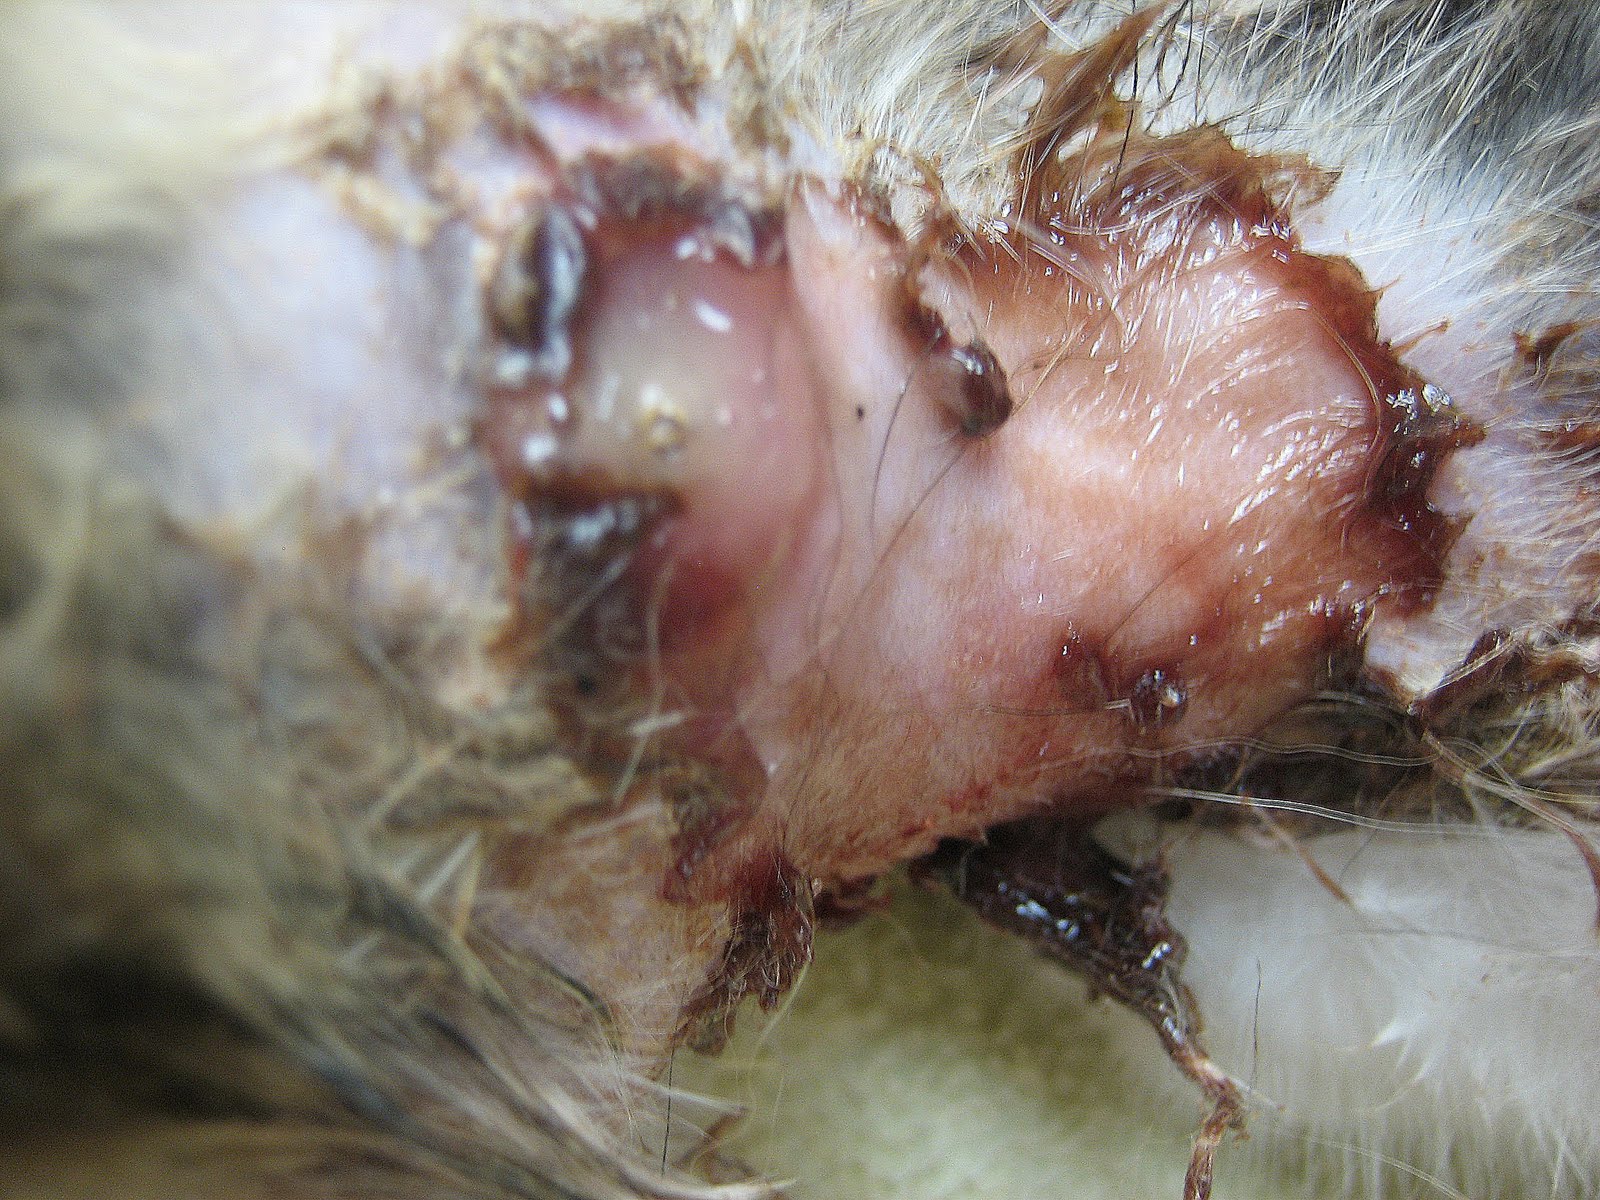 Bot Fly Larvae Extracted From 8-Week-Old Kitten's Nose 